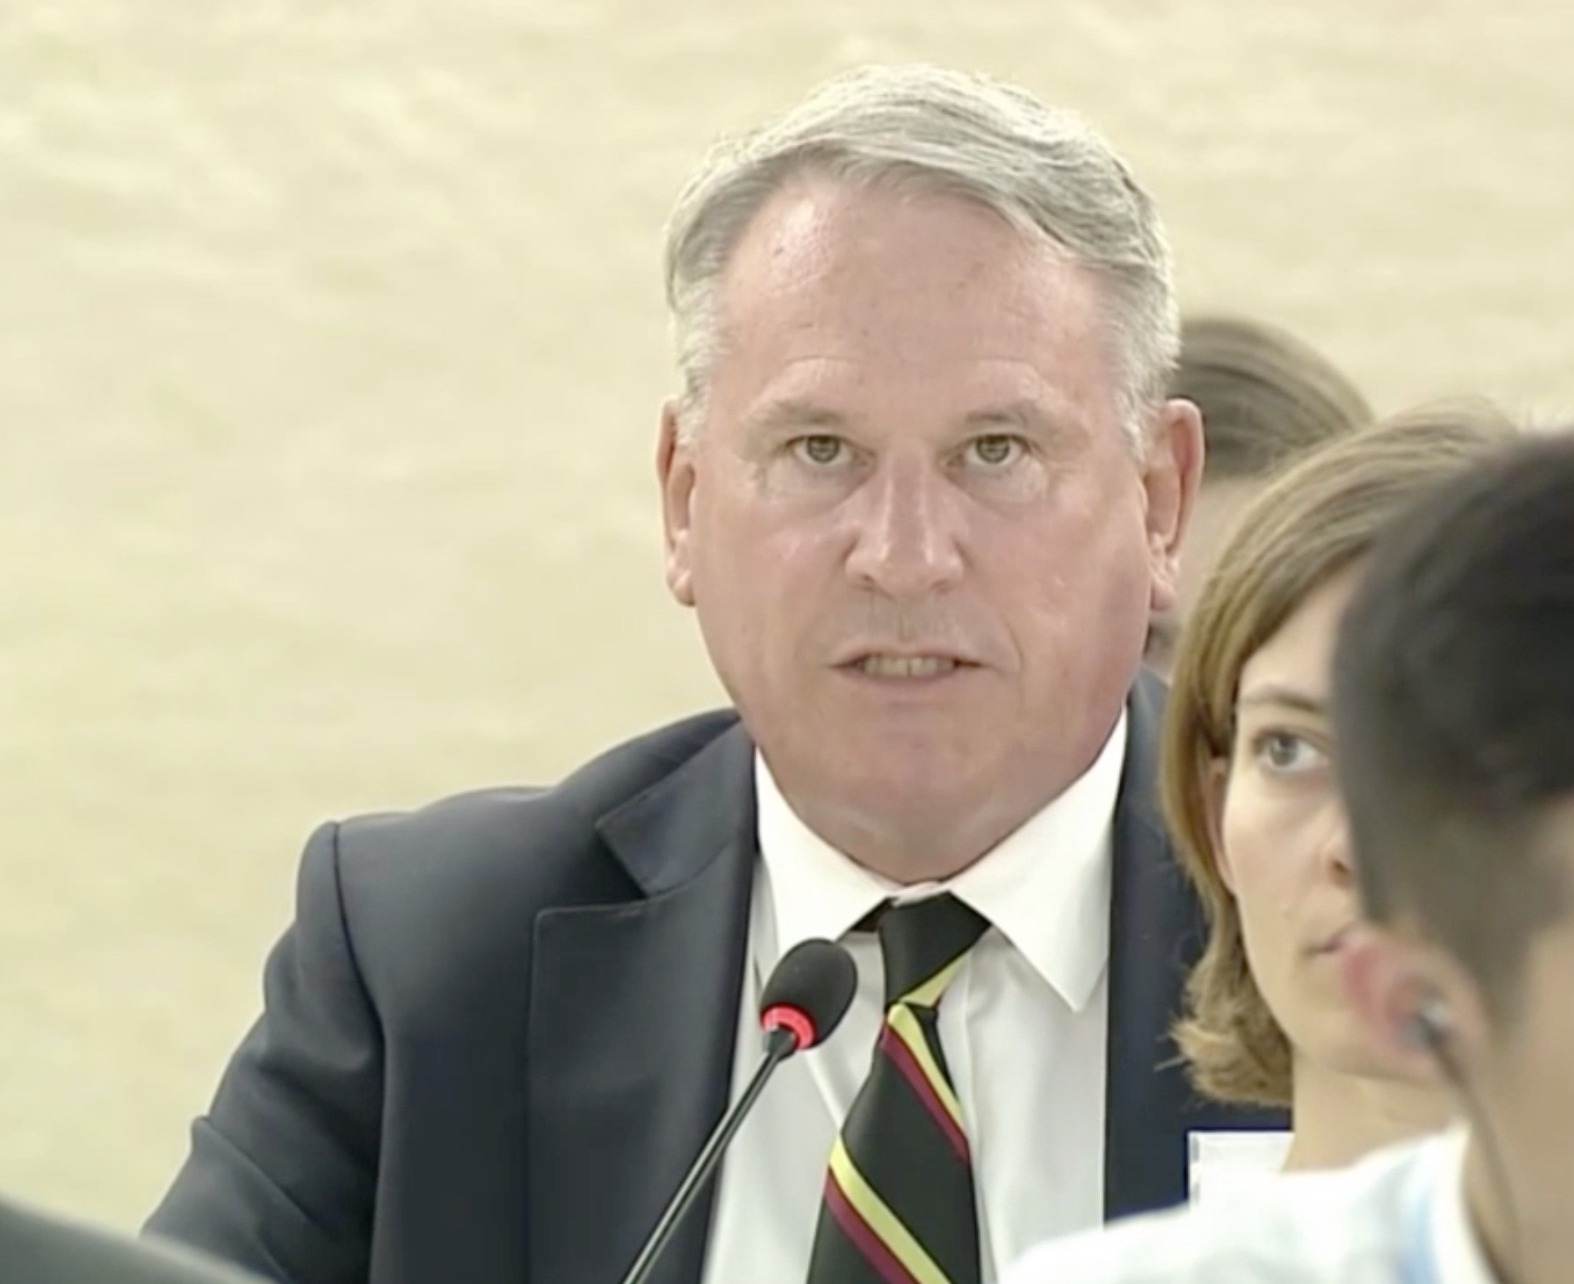 Submission by Colonel (Retd) Richard Kemp CBE  on behalf of The High Level Military Group to  The United Nations Commission of Inquiry on the 2018 Protests in the Occupied Palestinian Territory